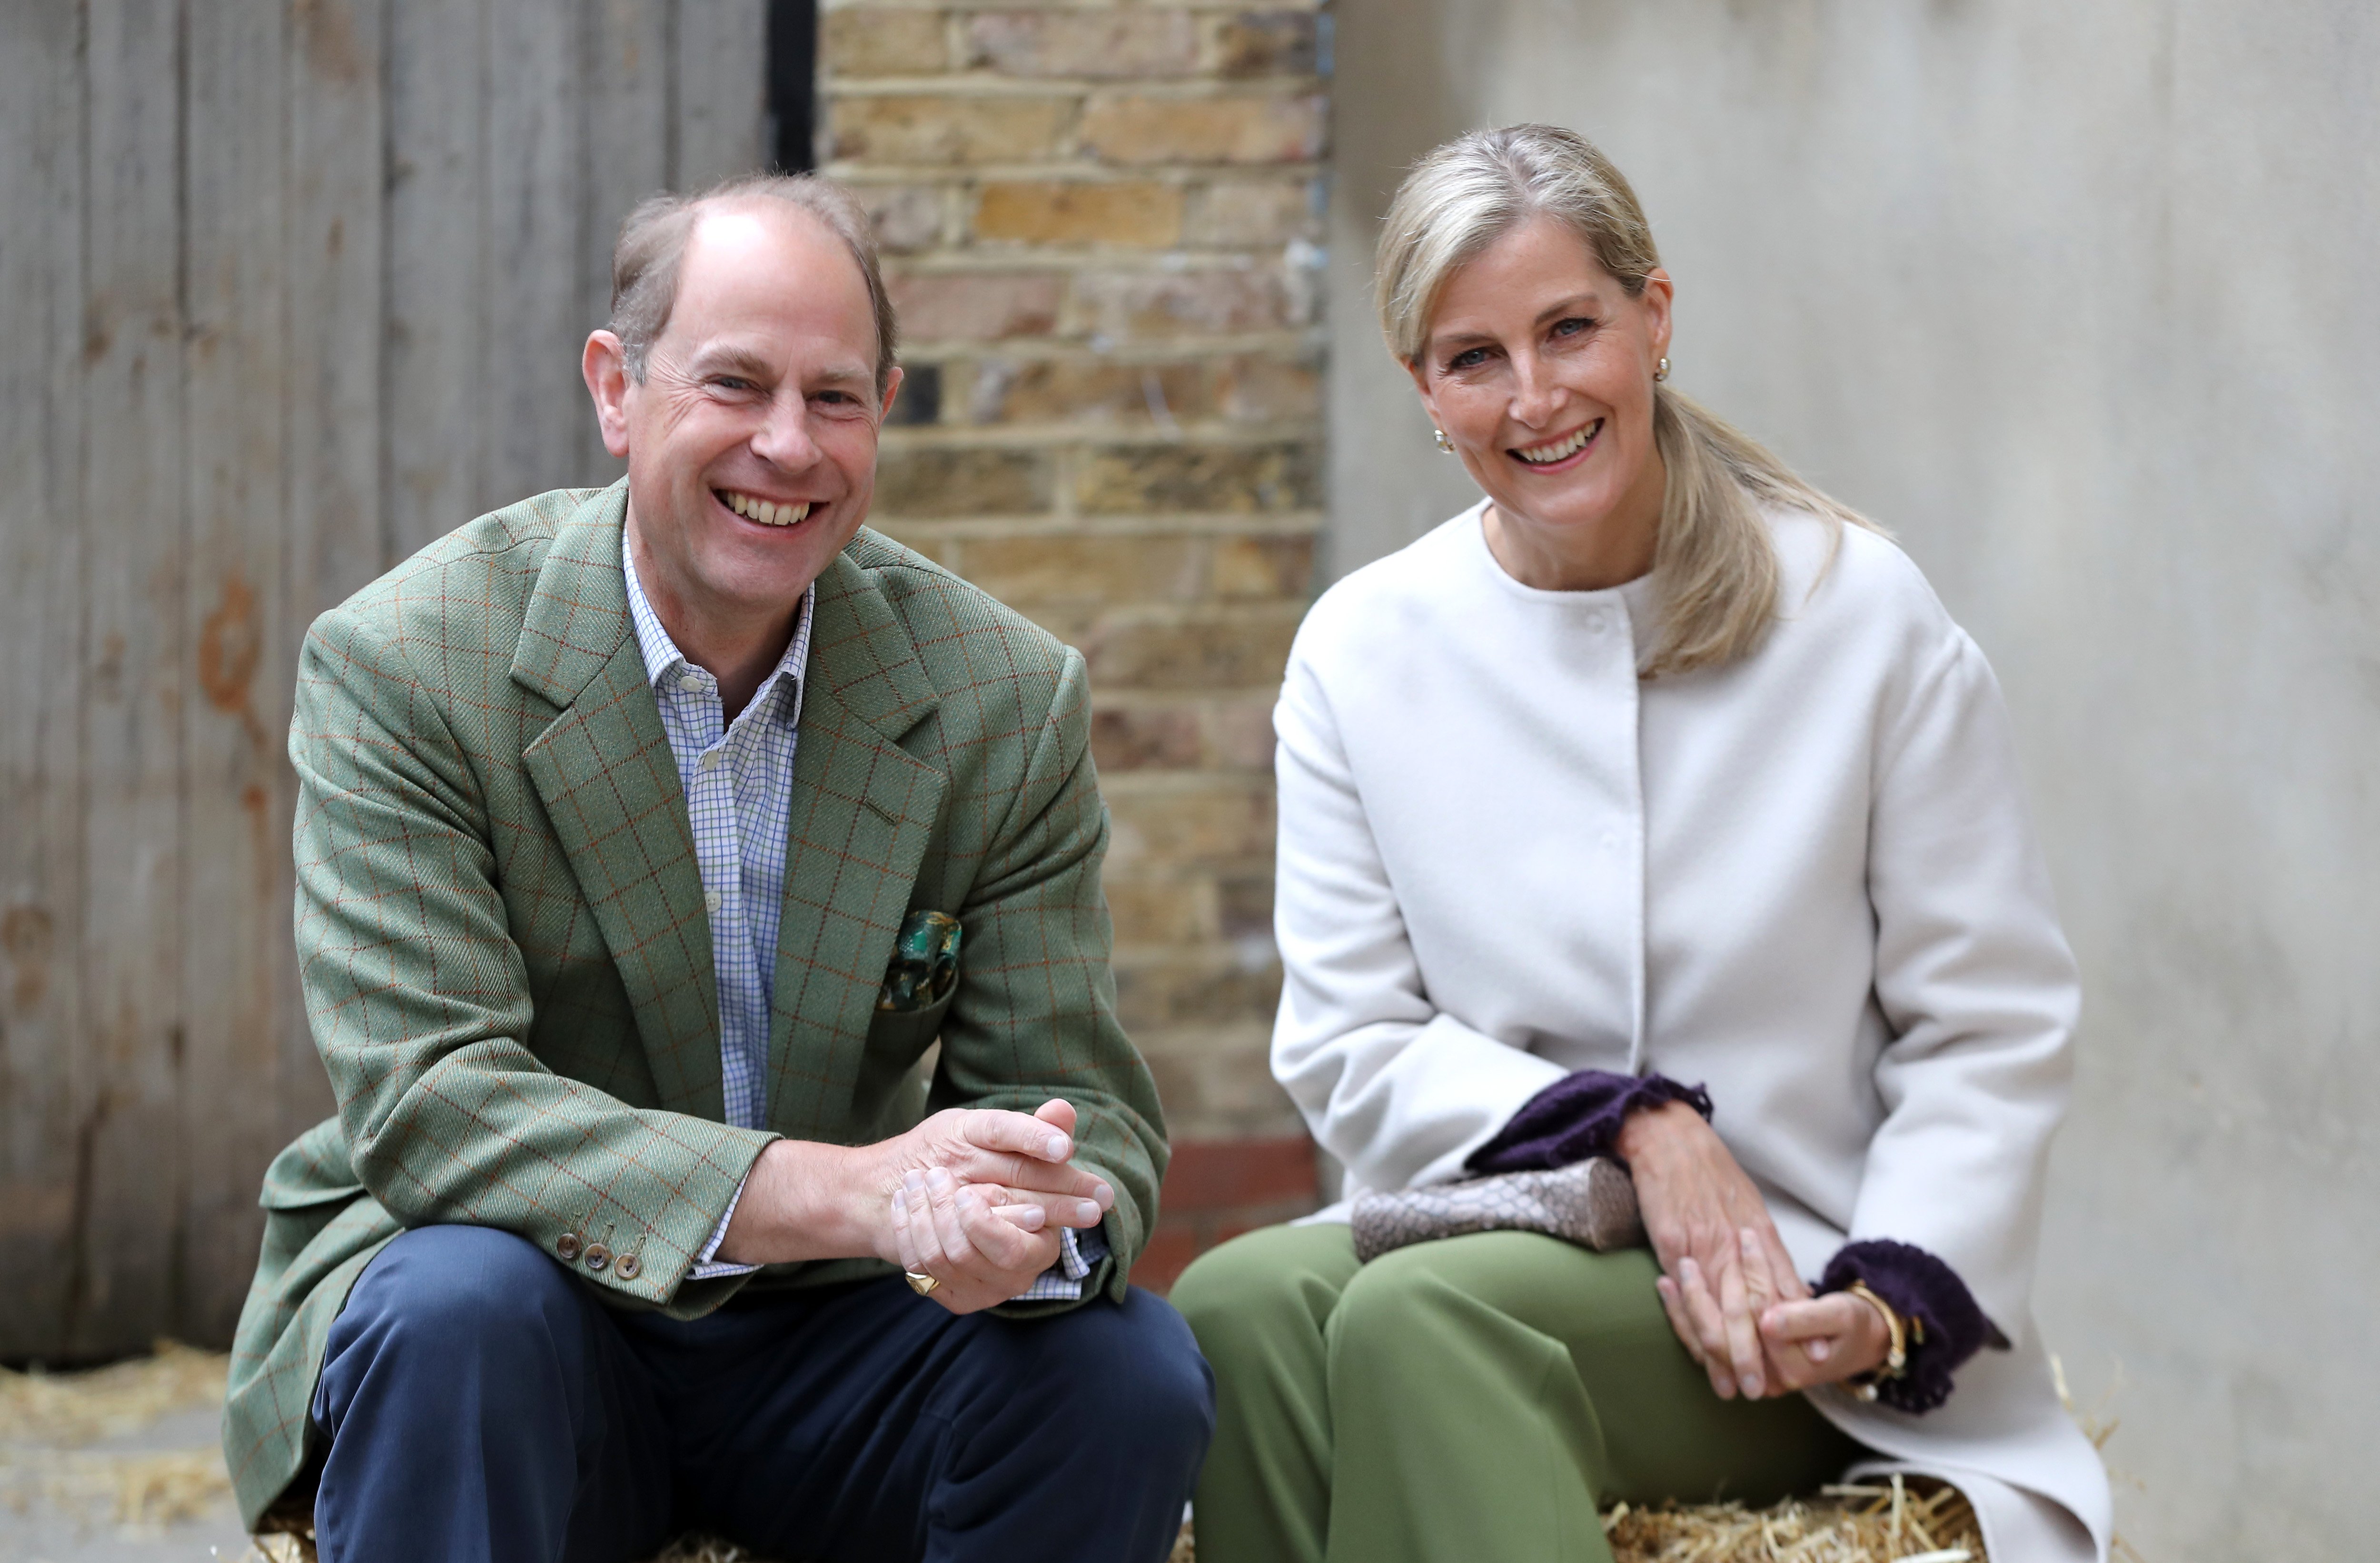 Prince Edward, Earl of Wessex and Sophie, Countess of Wessex during their visit to Vauxhall City Farm on October 01, 2020 in London, England. | Source: Getty Images